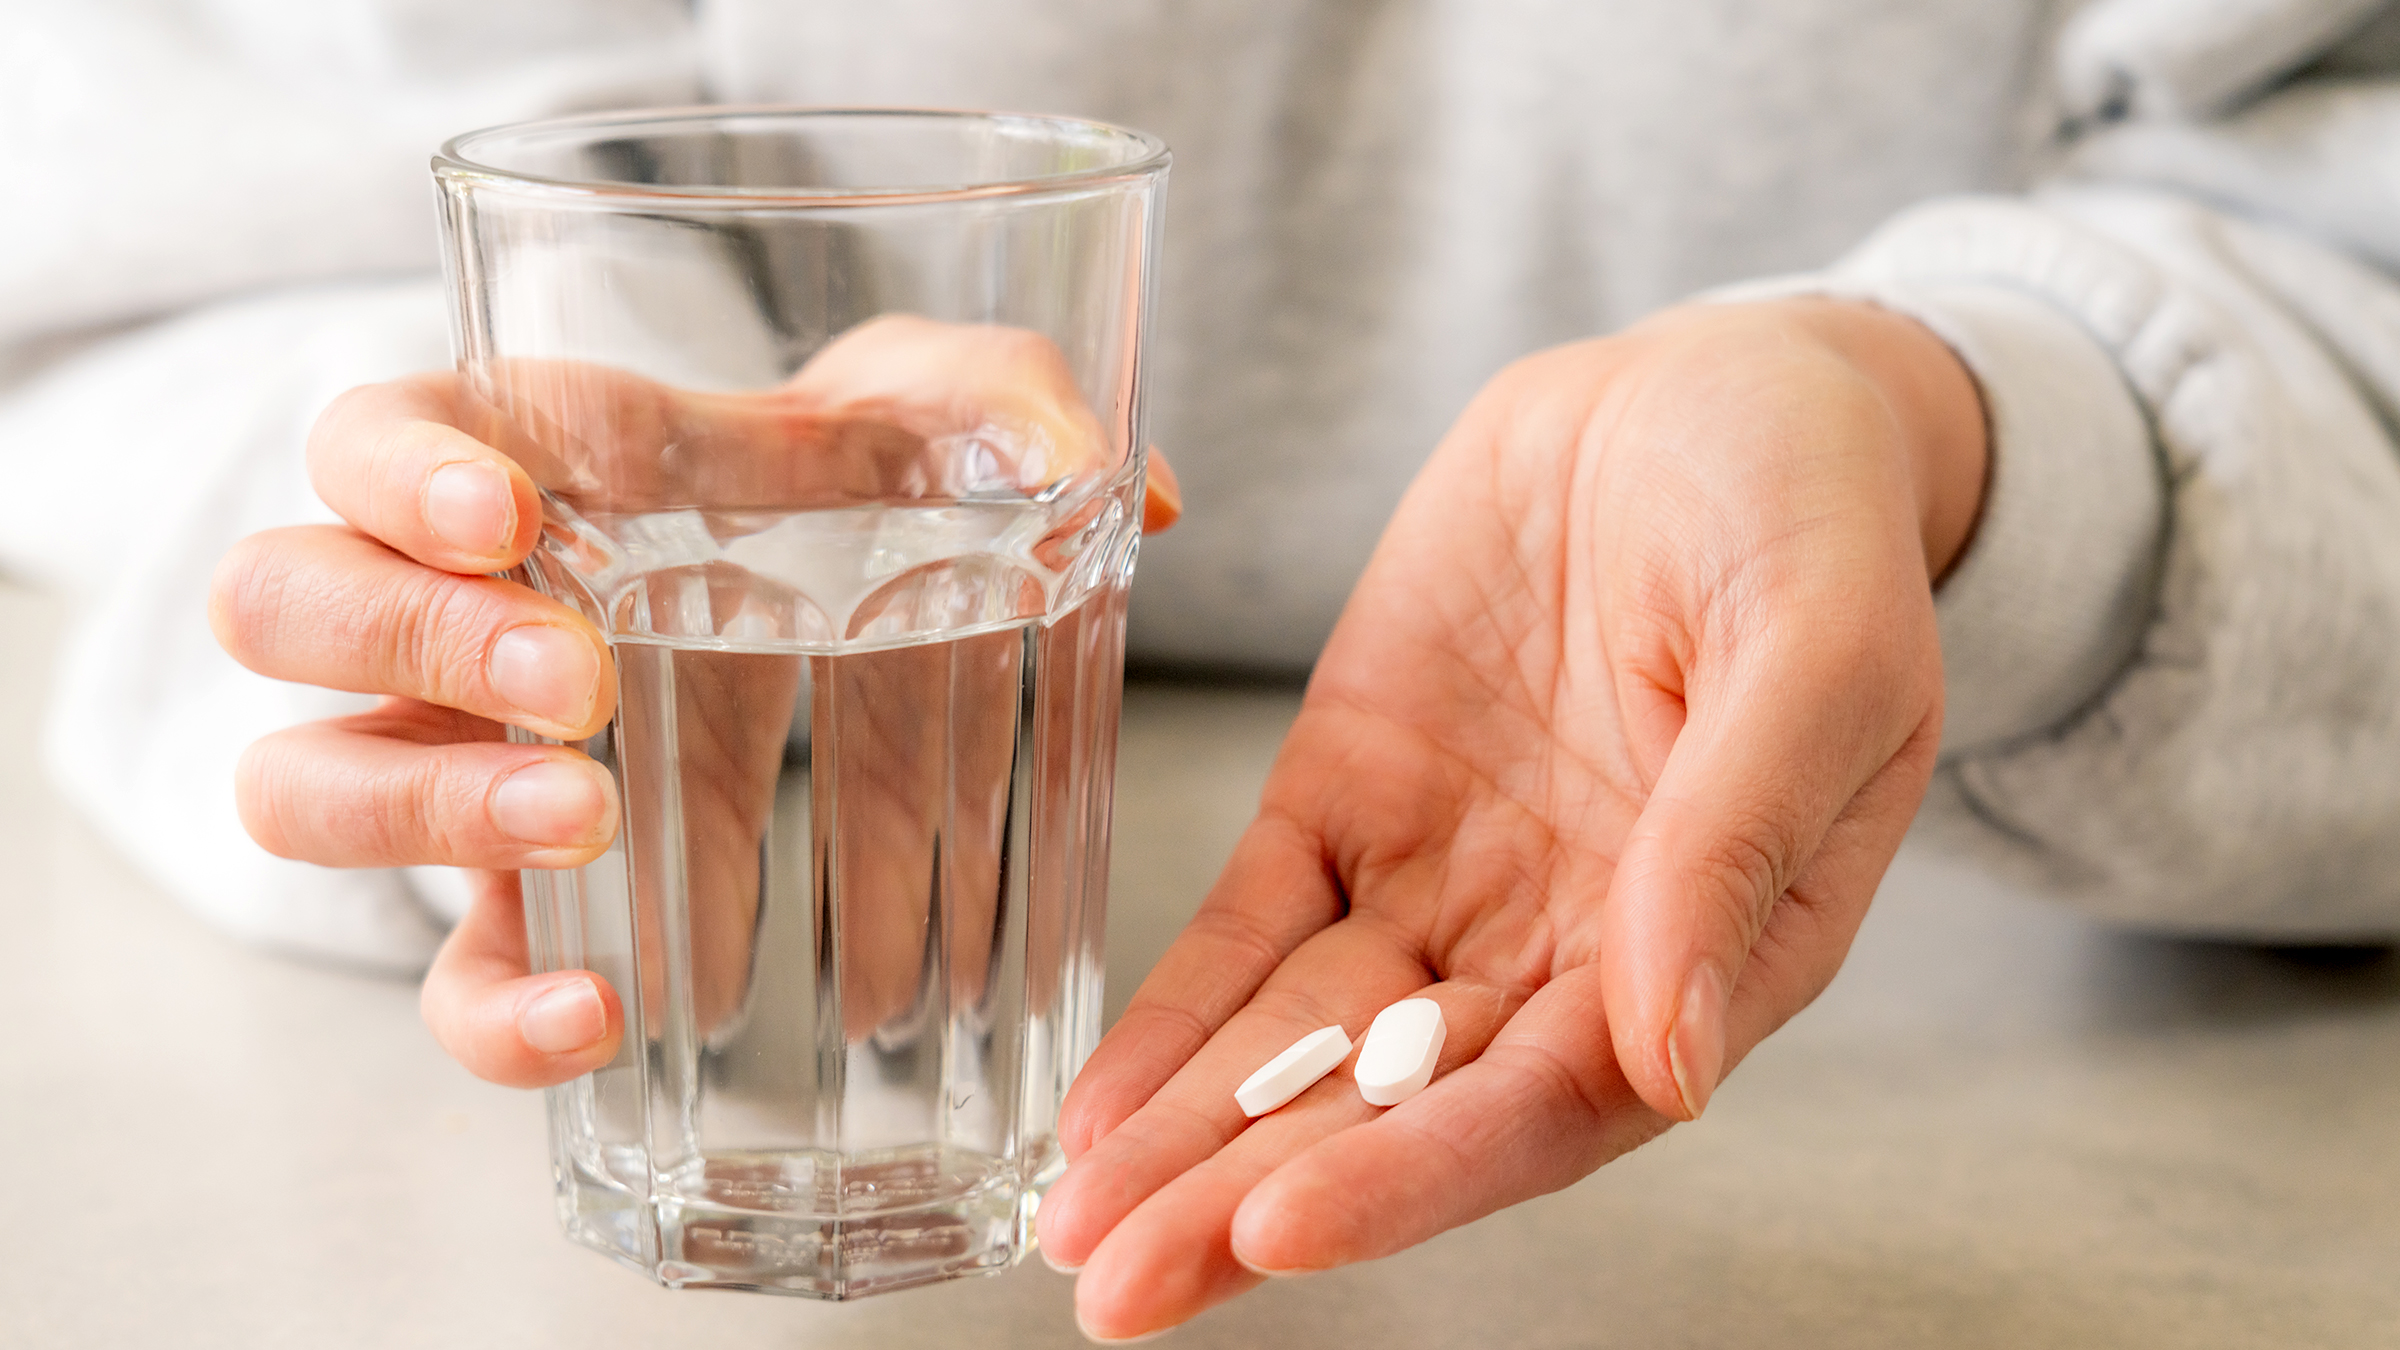 Does Phentermine give you energy?